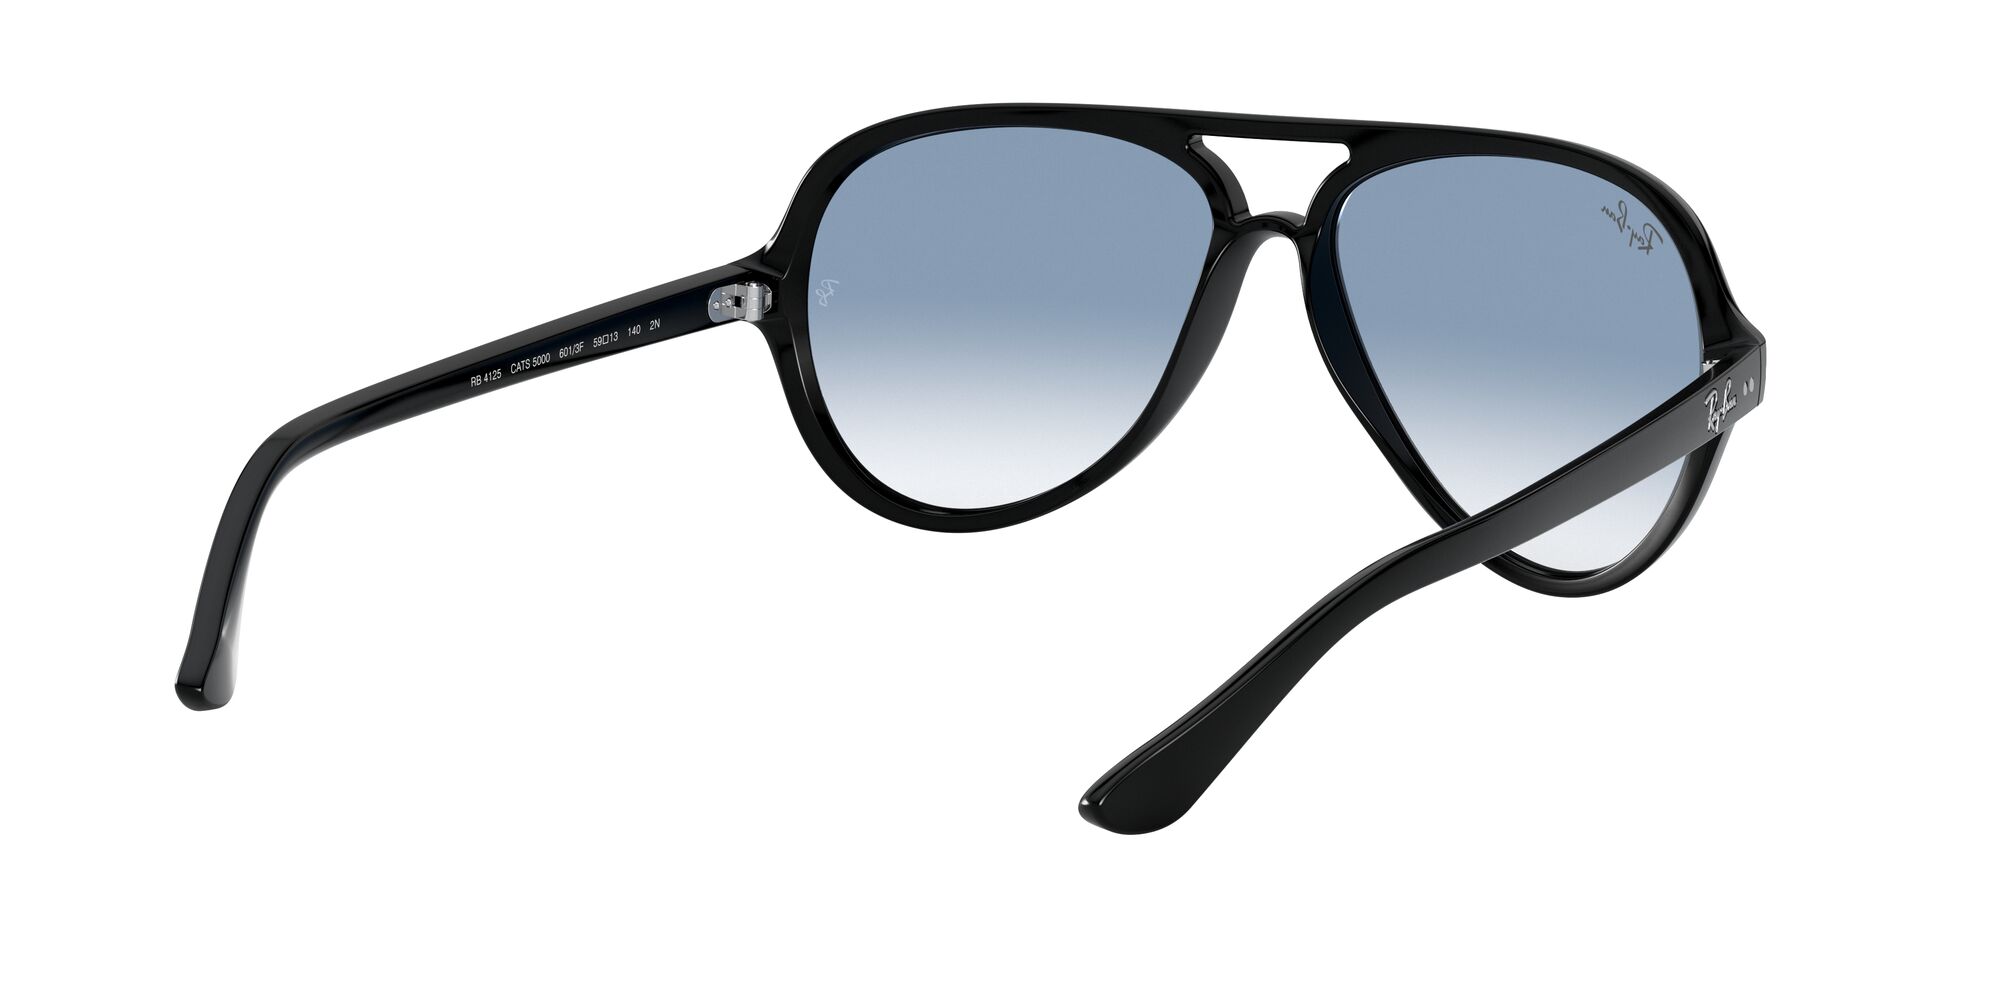 Ray-Ban RB4125 Cats 5000 Sunglasses - image 8 of 12